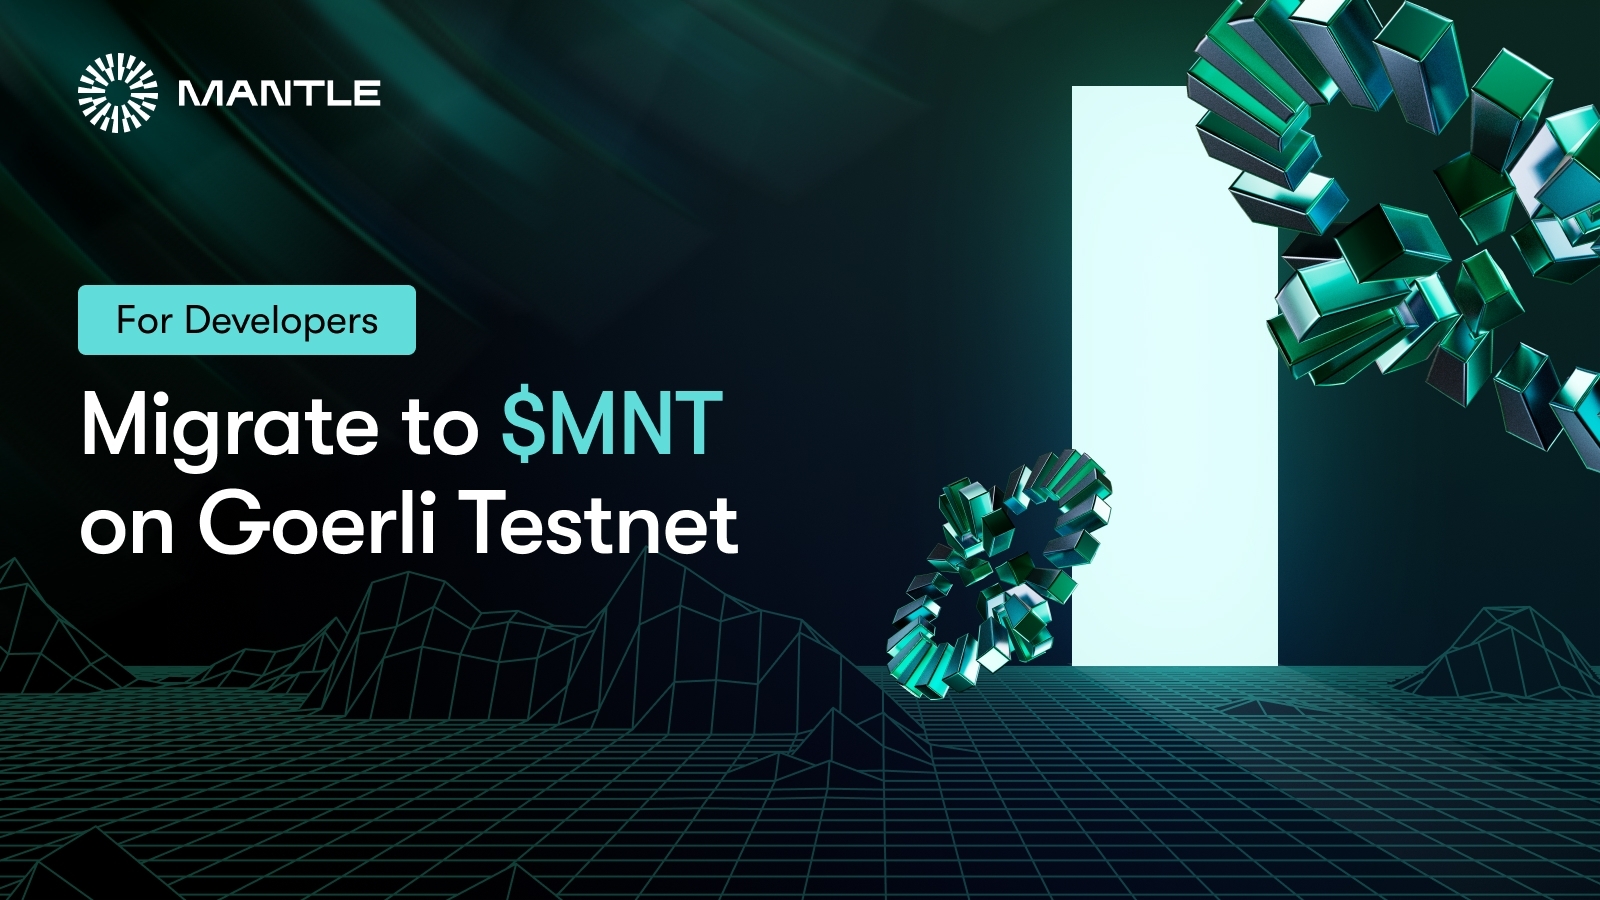 Migrate $BIT to $MNT on Goerli for Developers